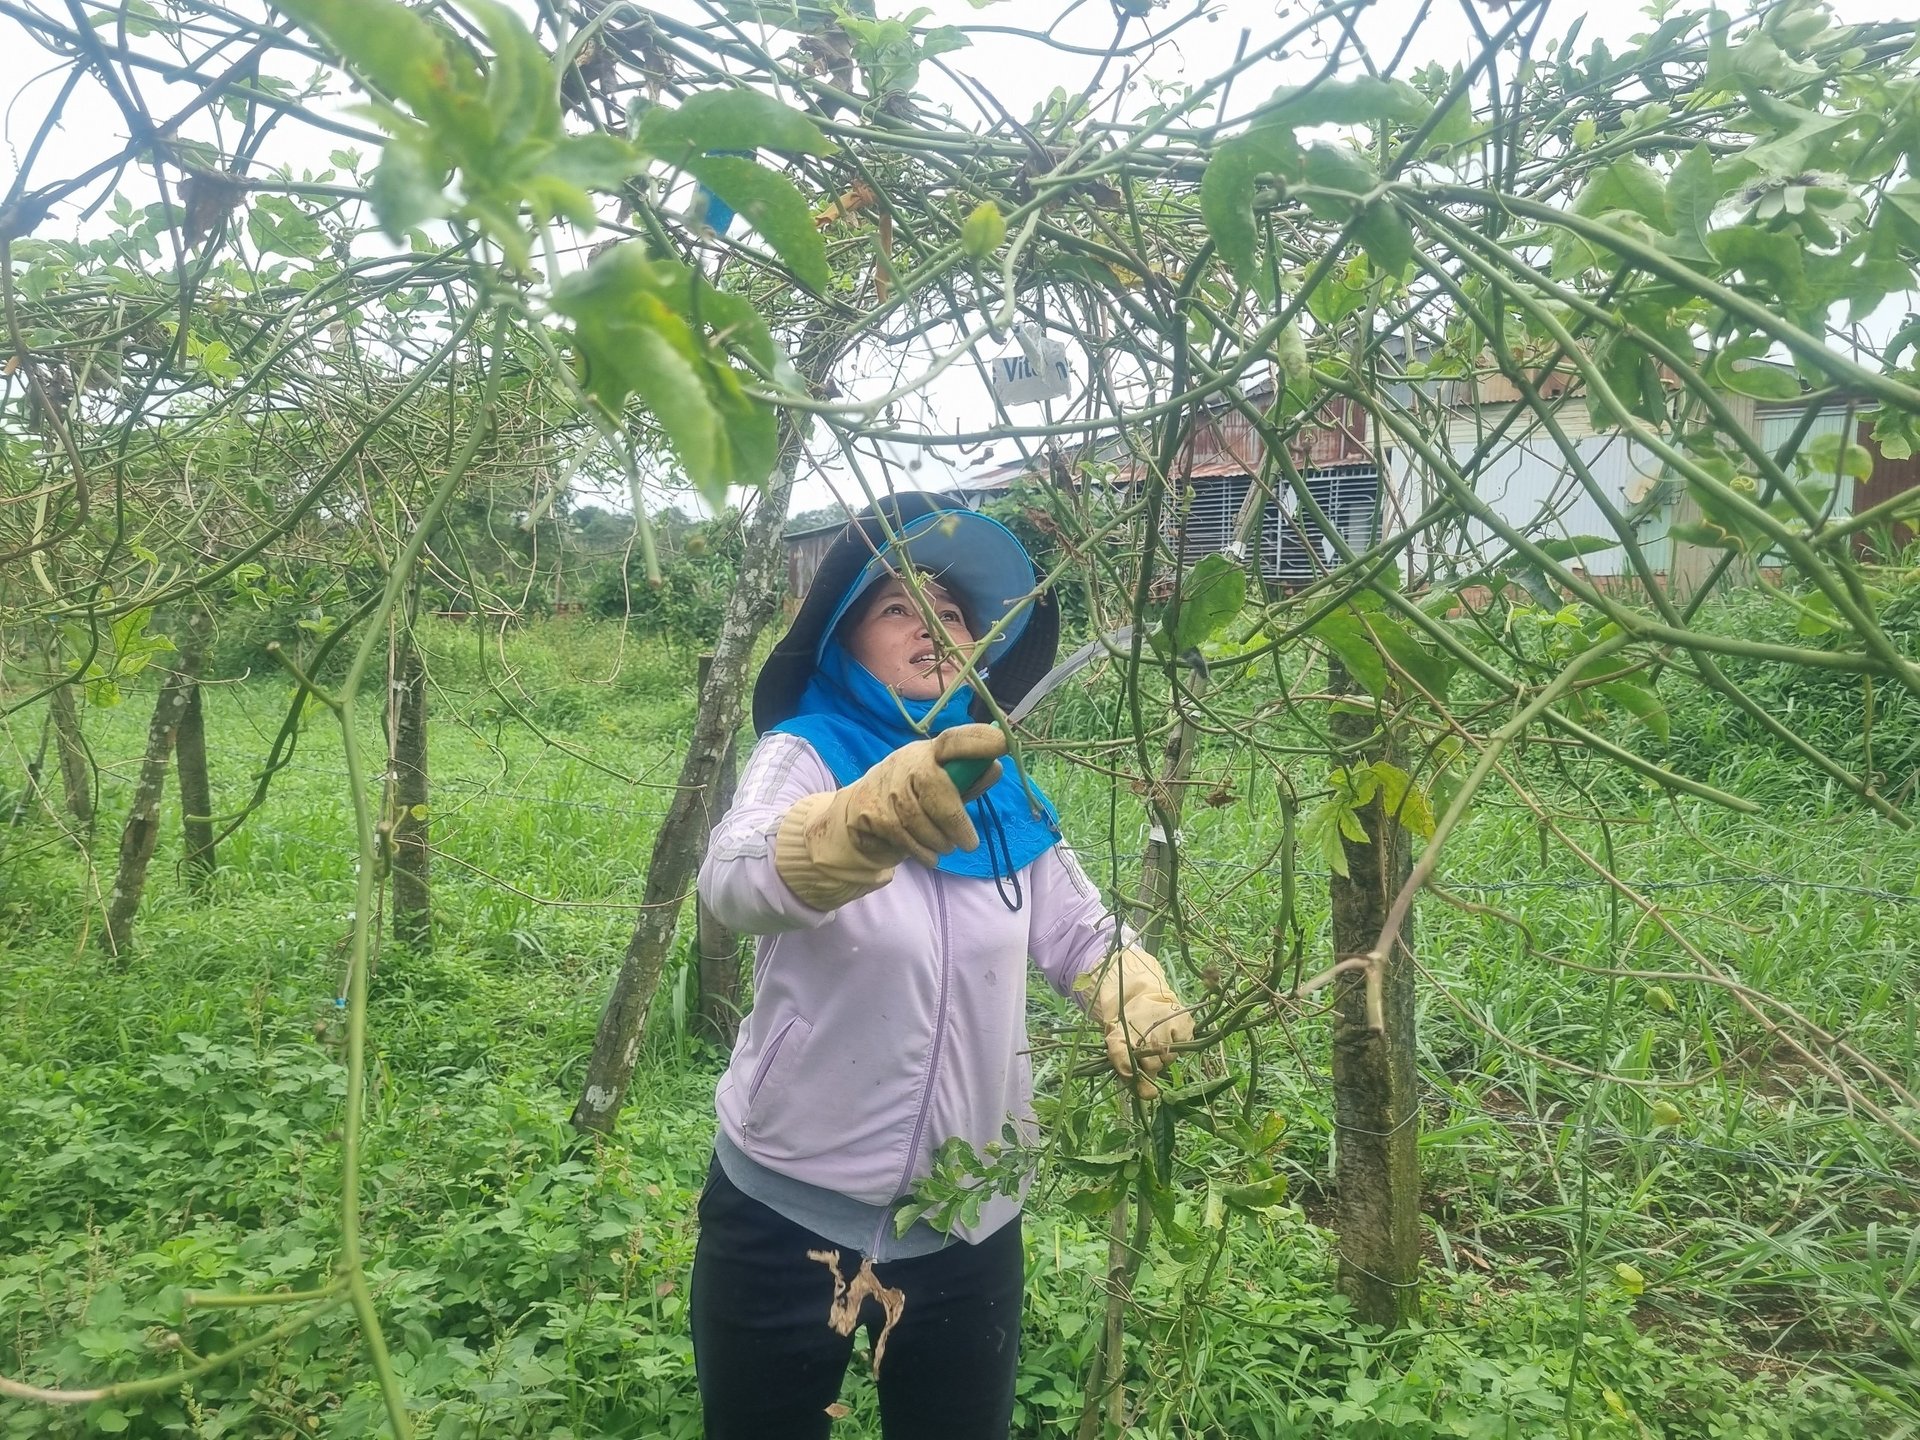 Many households have decided to destroy the passion fruit garden to switch to growing crops. Photo: Tuan Anh.